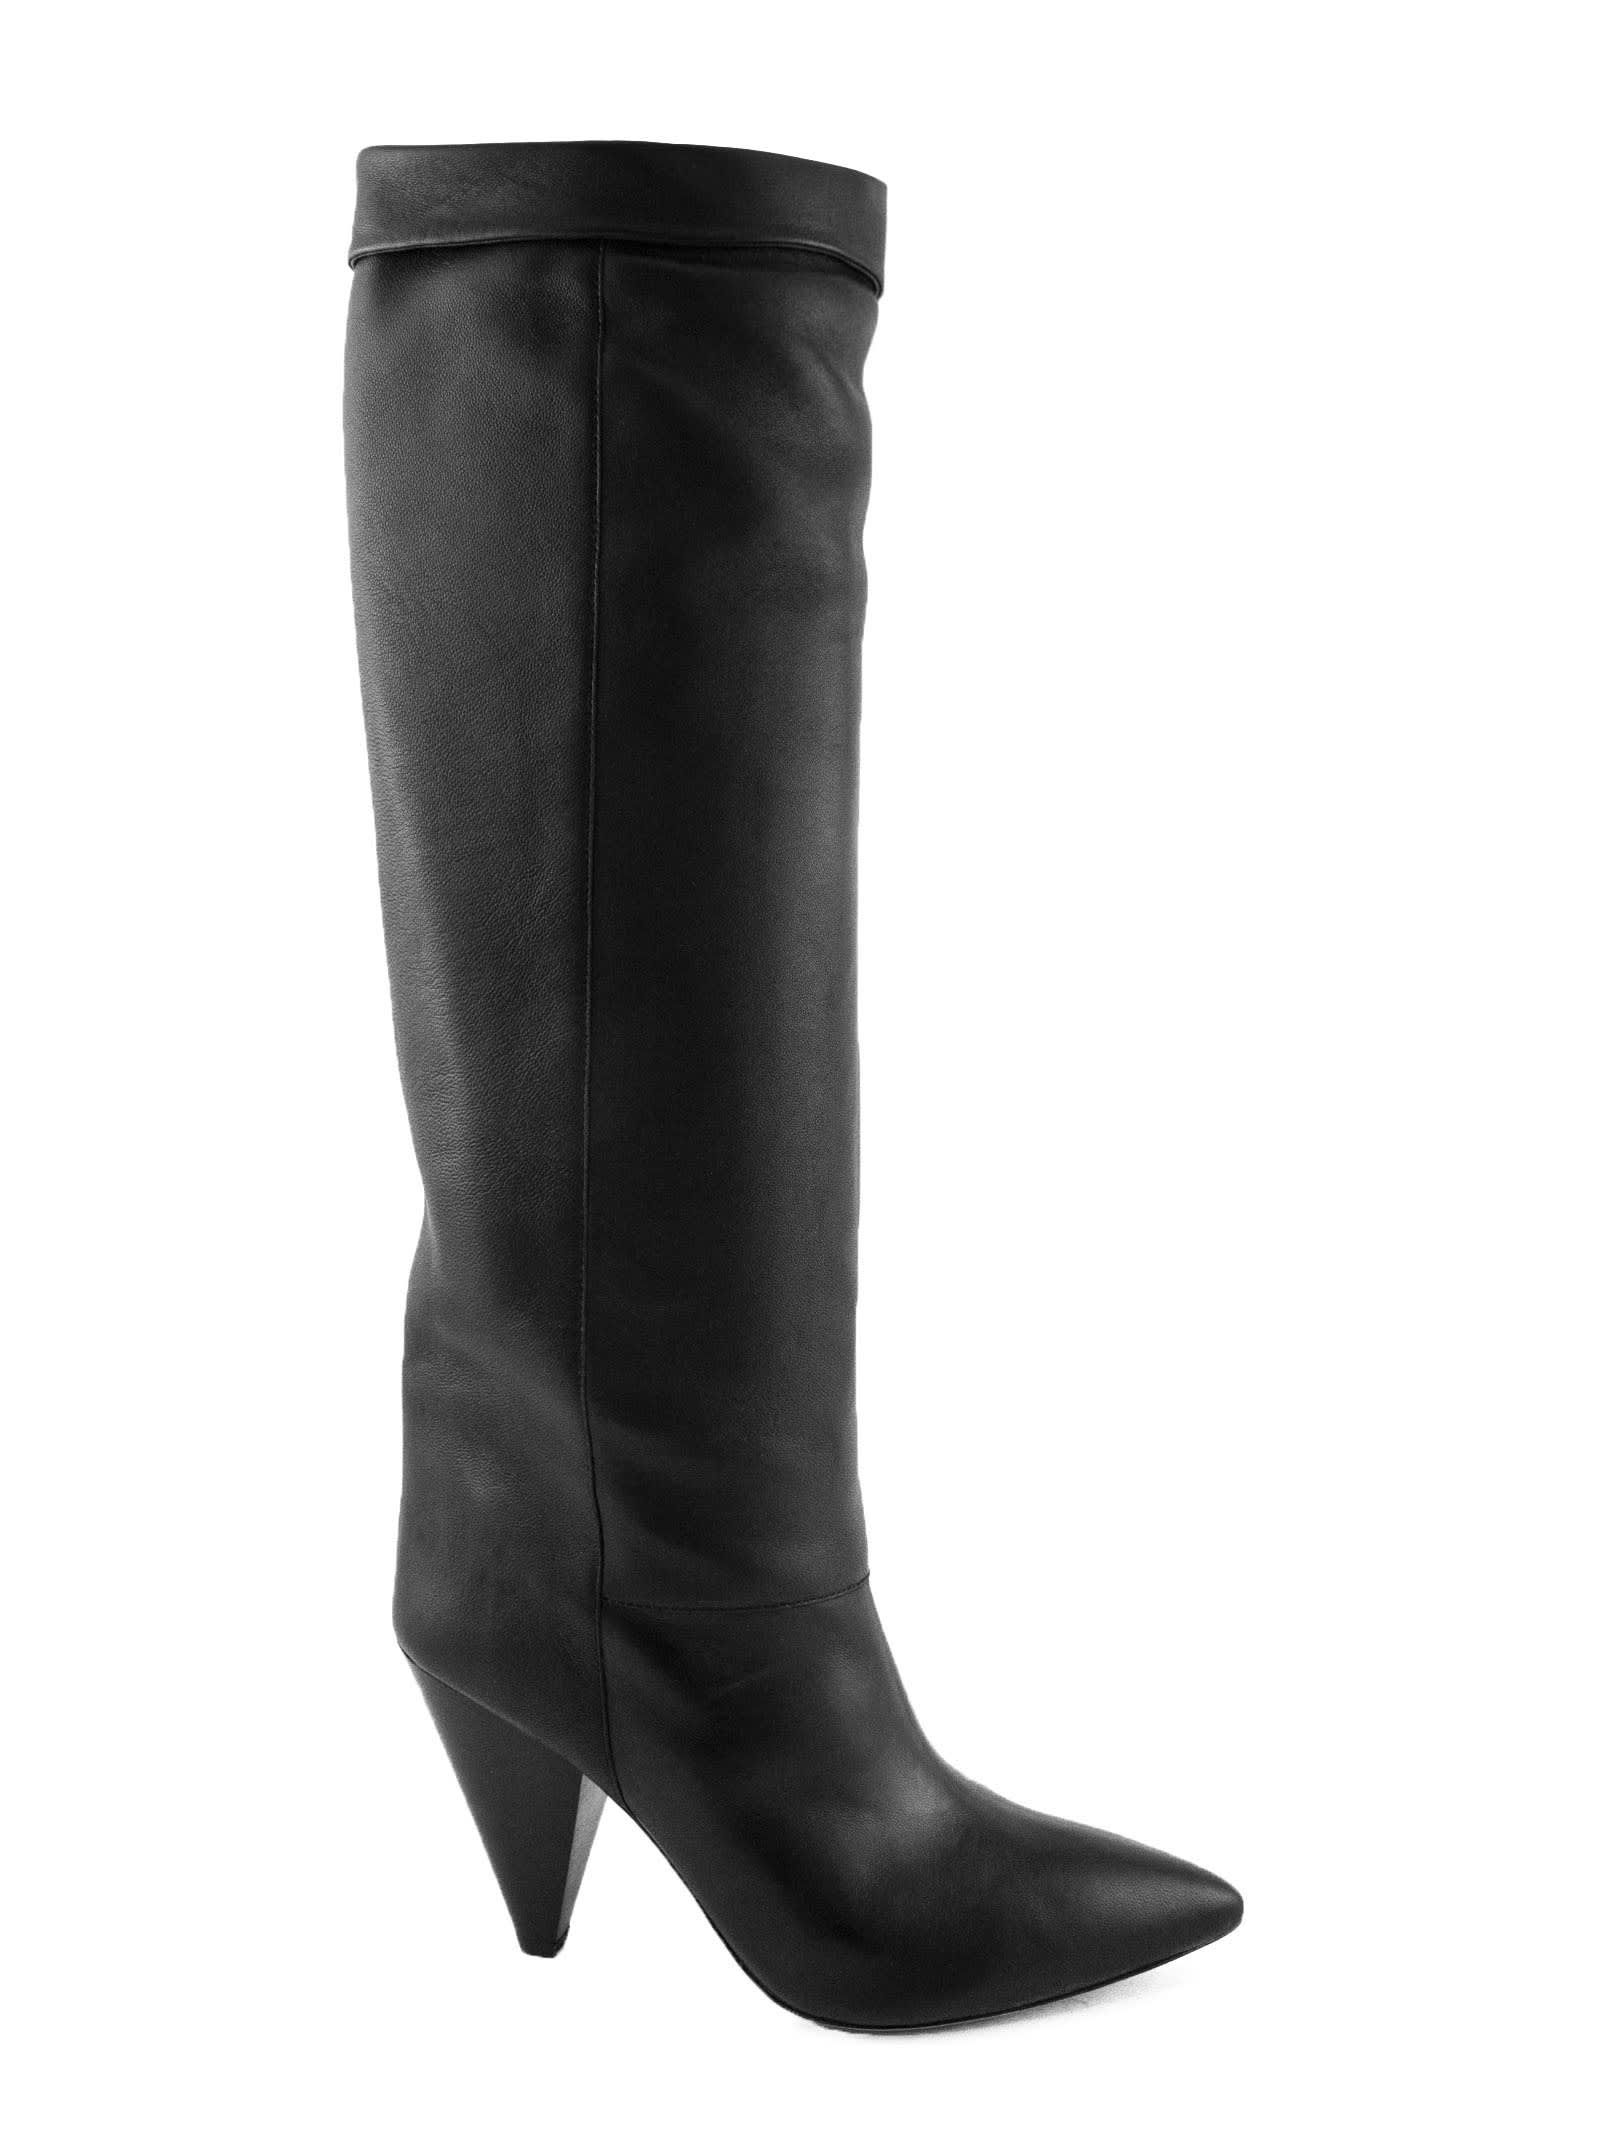 Buy Isabel Marant Black Leather Loens High Boots online, shop Isabel Marant shoes with free shipping